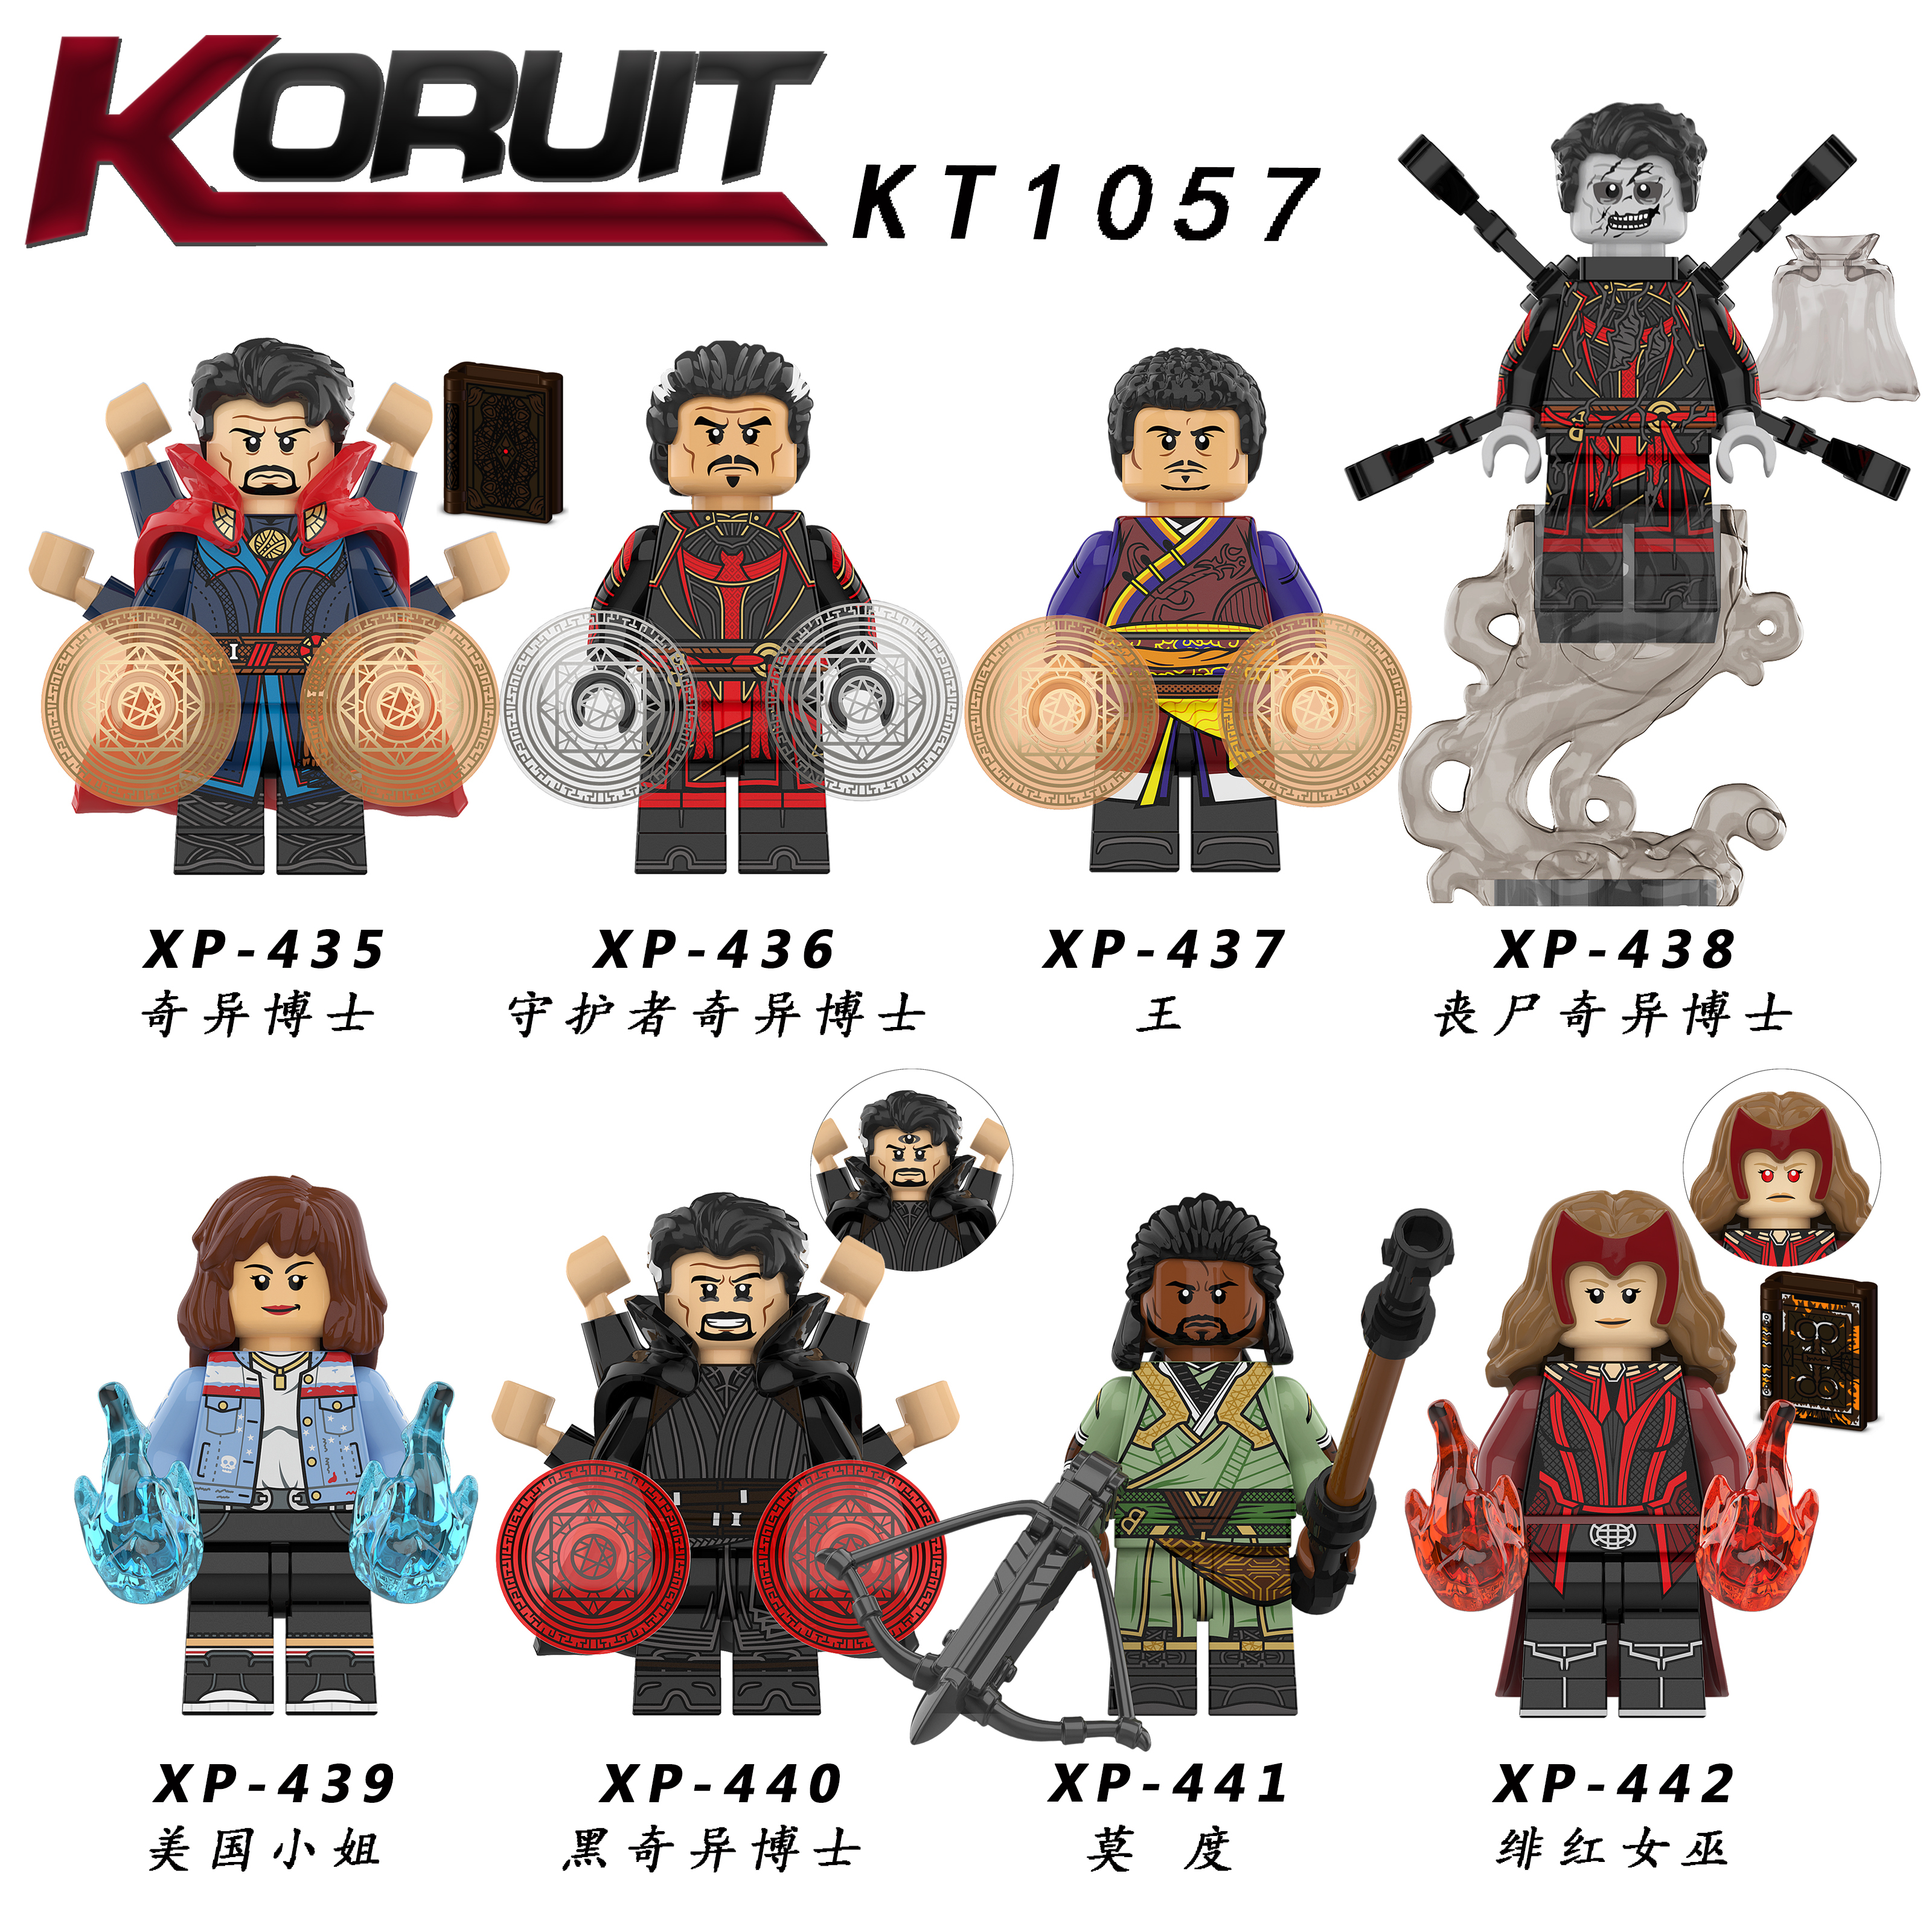 KT1057 XP435 XP436 XP437 XP438 XP439 XP440 XP441 XP442 The Avengers Doctor Strange Scarlet Witch King Movie Series Building Blocks Action Figures Educational Toys For Kids Gifts